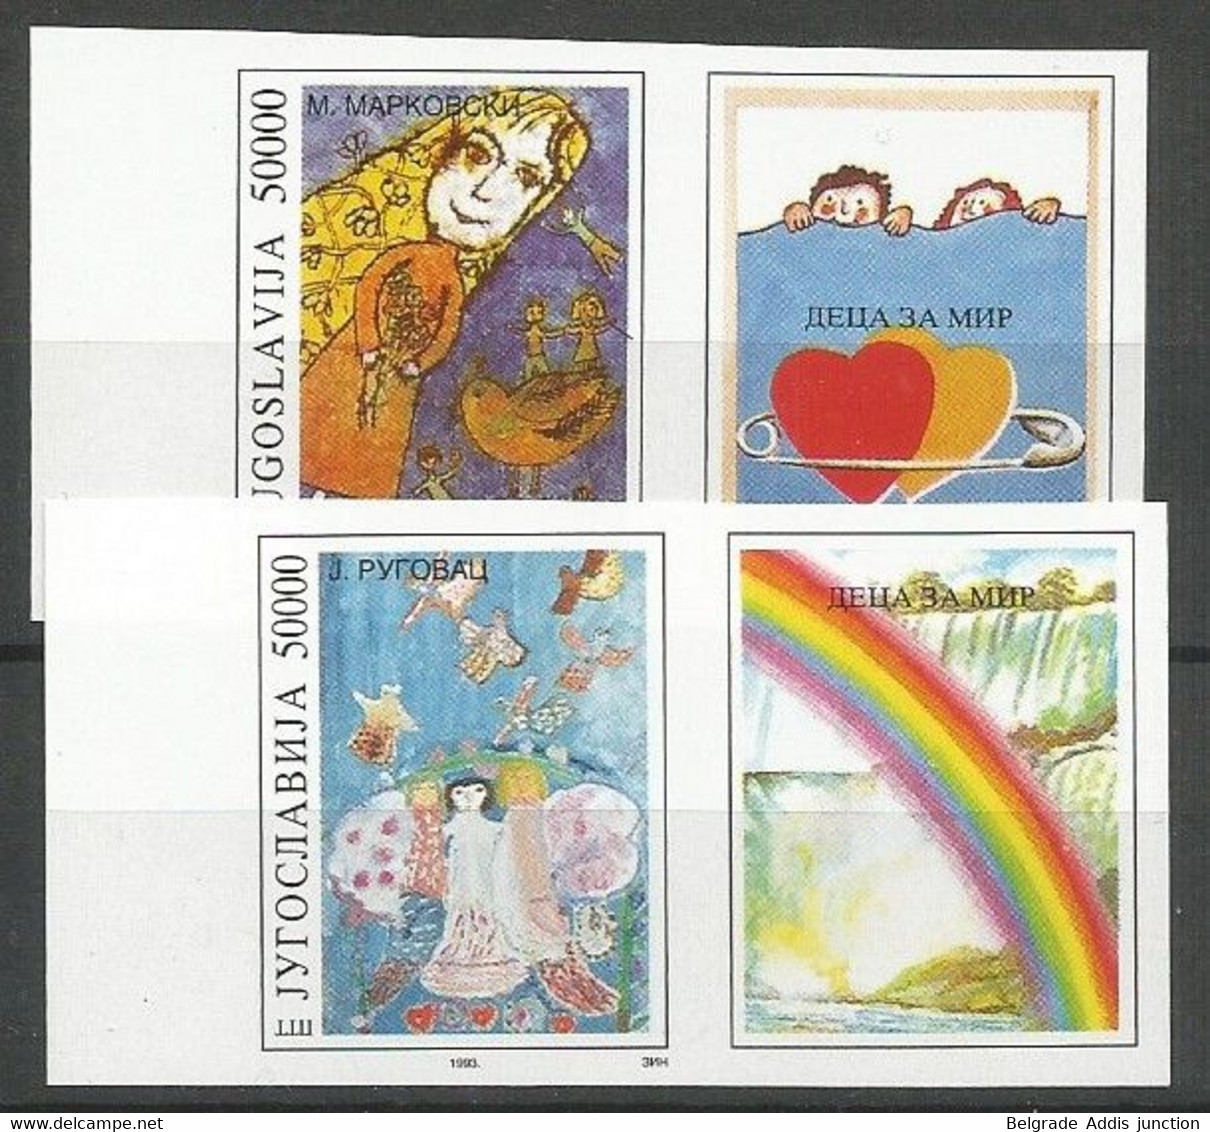 Yugoslavia ERROR Mi.2599/600 Complete Set IMPERFORATED With LABELS ** / MNH 1993 Europa Hang-on Issues Children Painting - Imperforates, Proofs & Errors